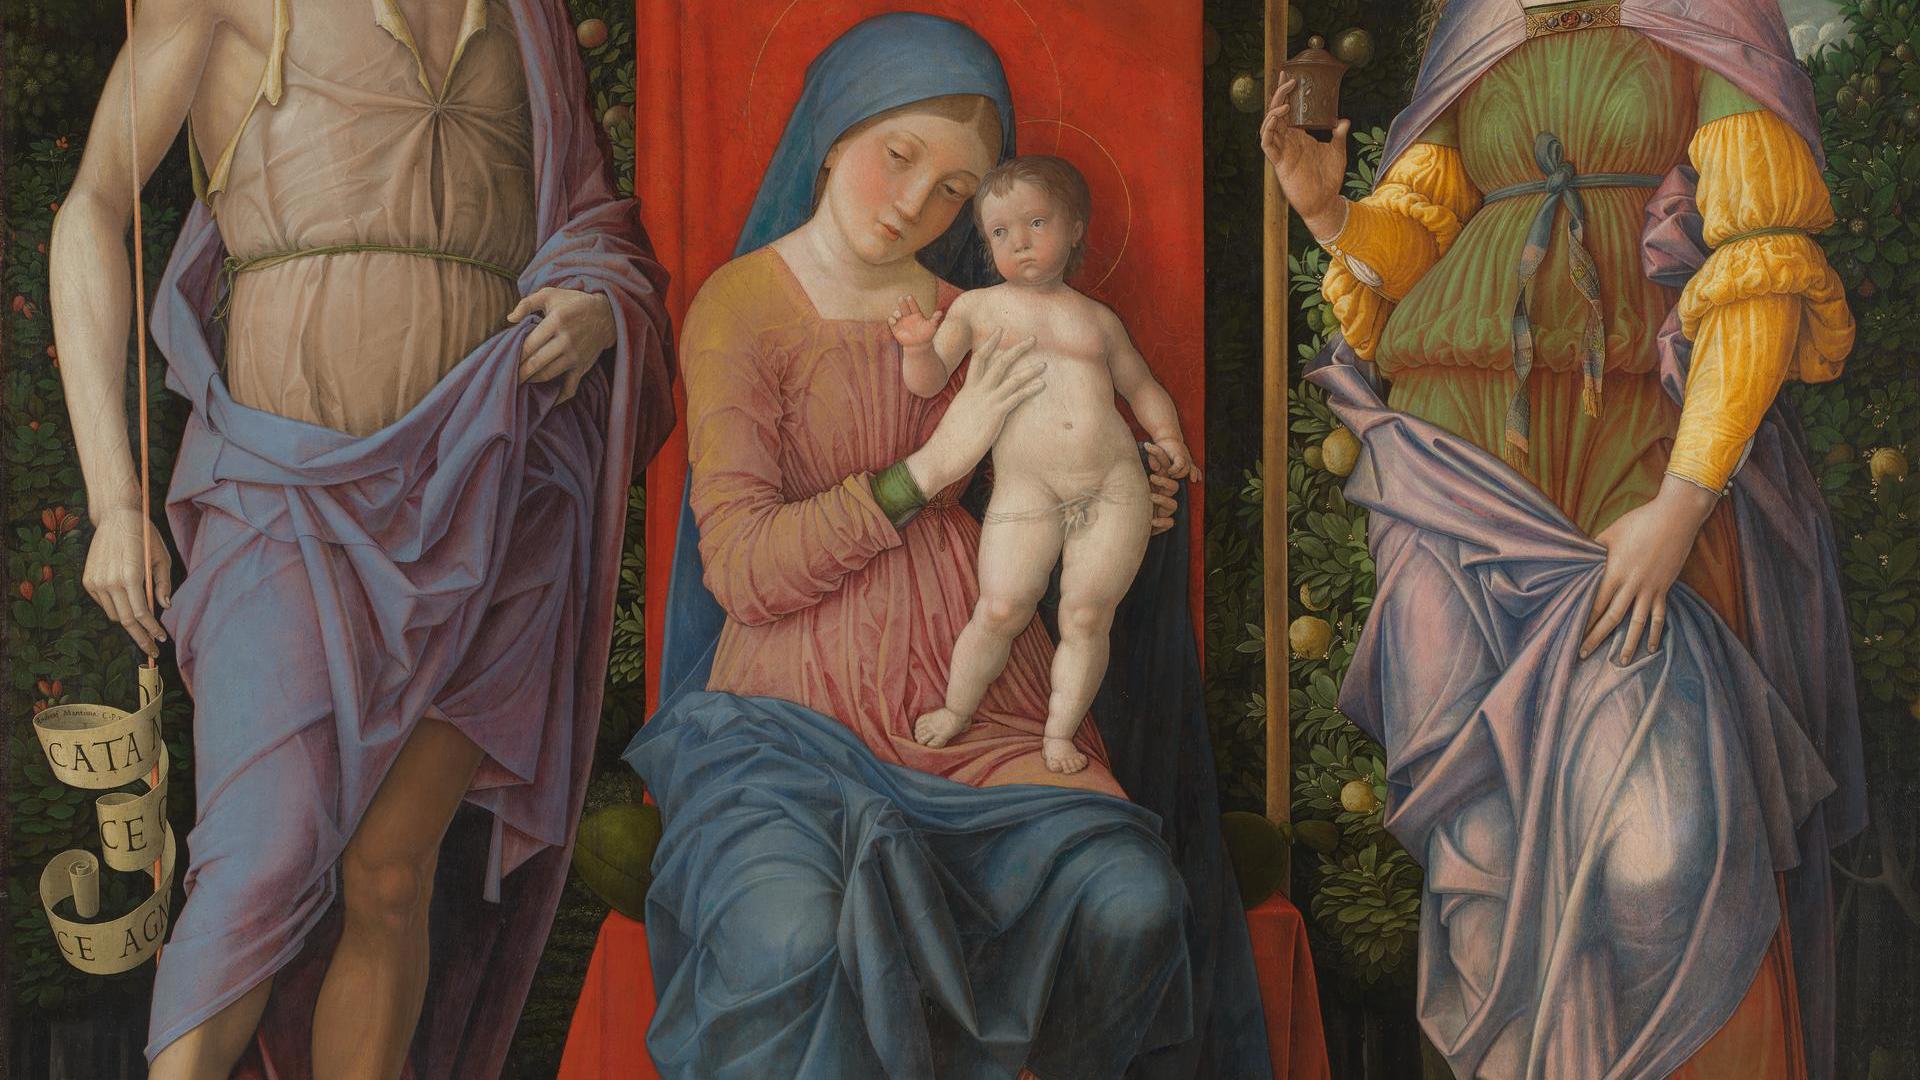 The Virgin and Child with Saints by Andrea Mantegna